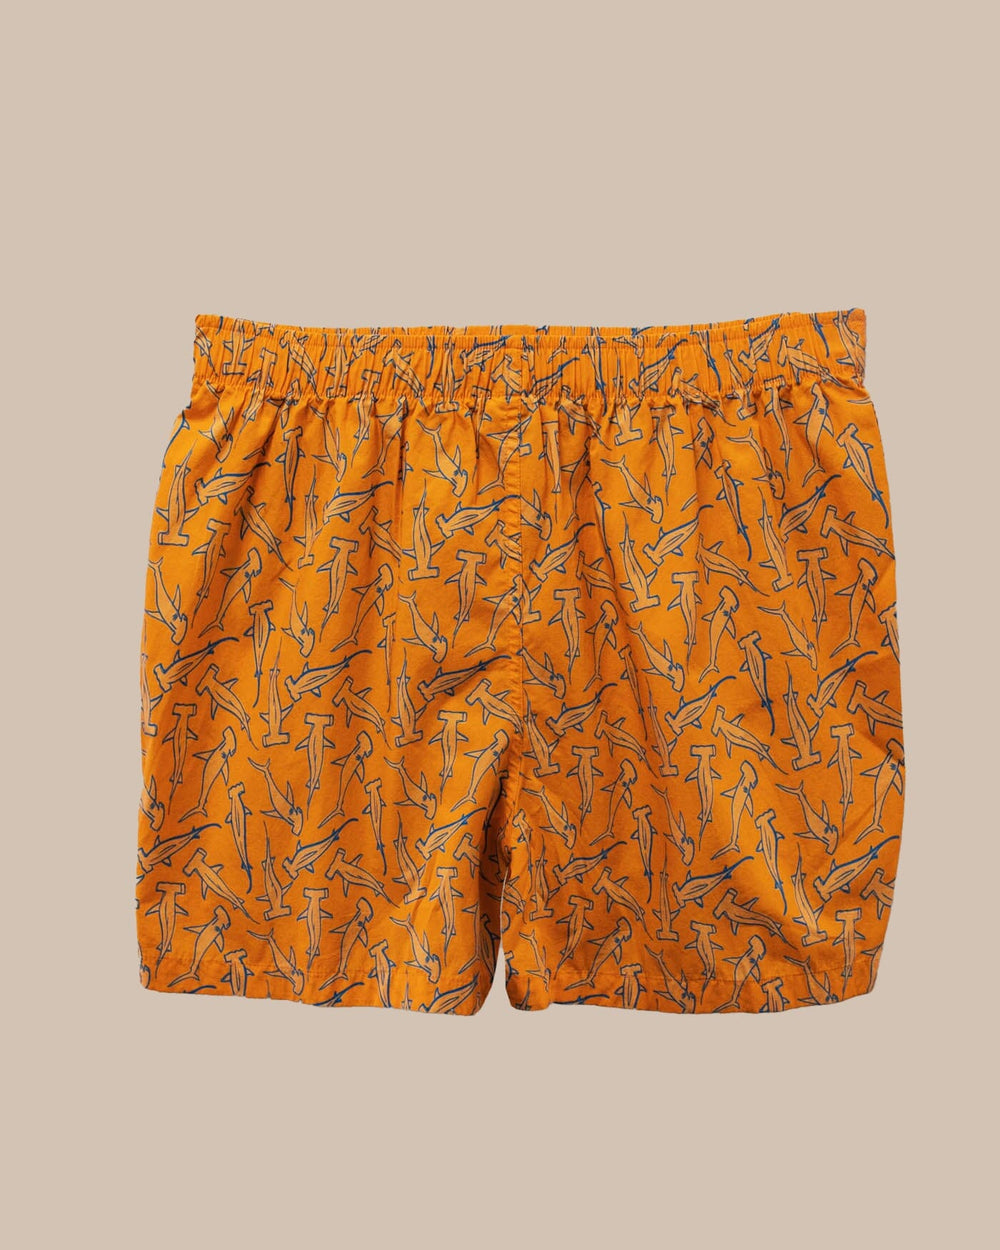 The back view of the Southern Tide Nailed It Boxer by Southern Tide - Tangerine Orange